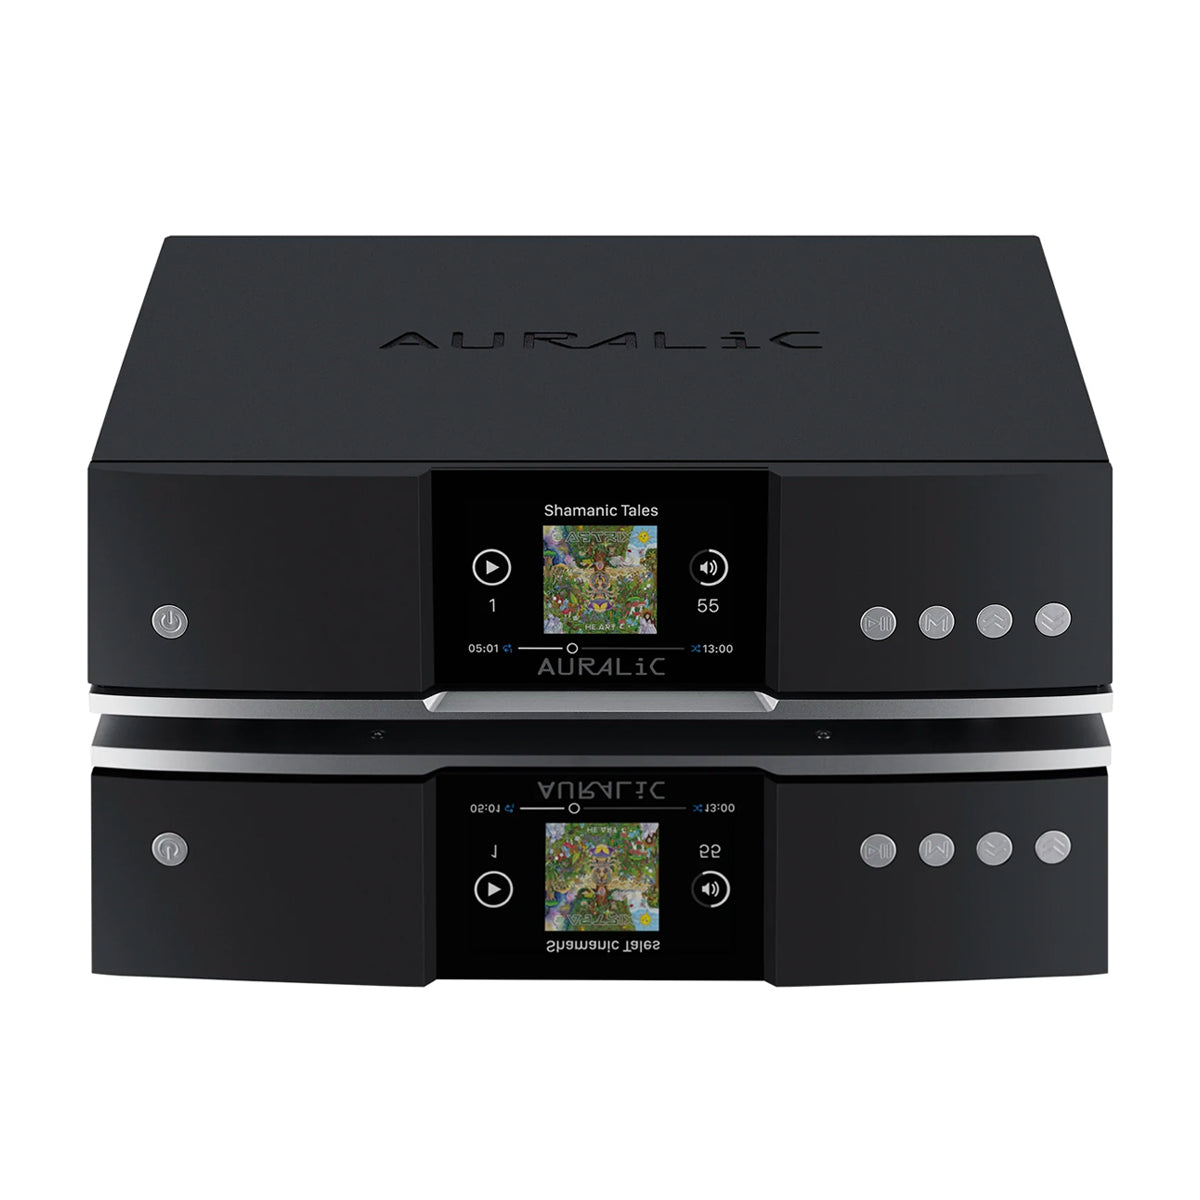 Auralic Aries G1.1 Wireless Streaming Transporter - The Audio Experts